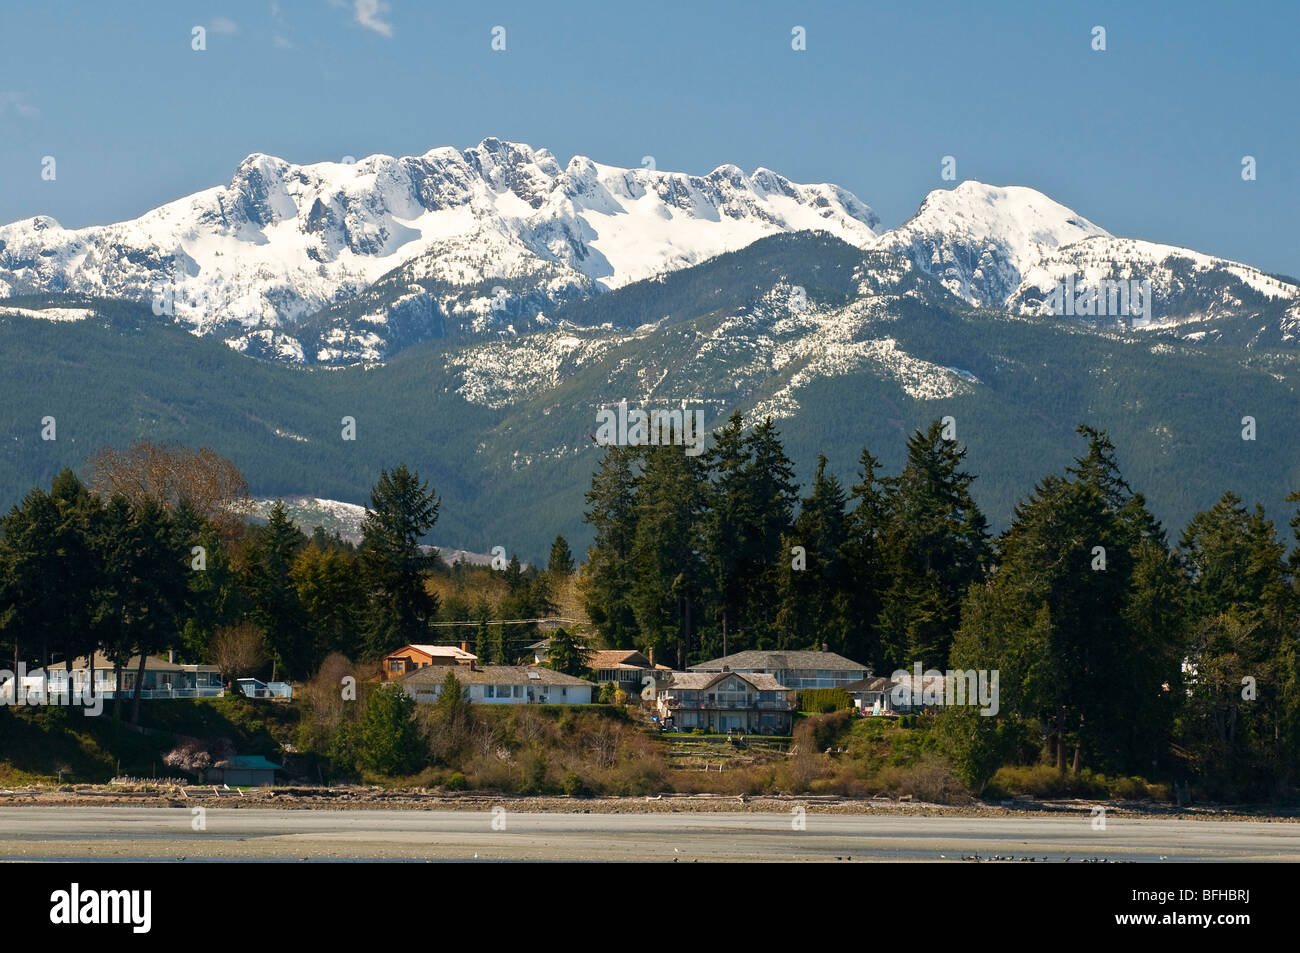 Snow-capped Mount Arrowsmith looms over the beach at Parksville BC. Stock Photo